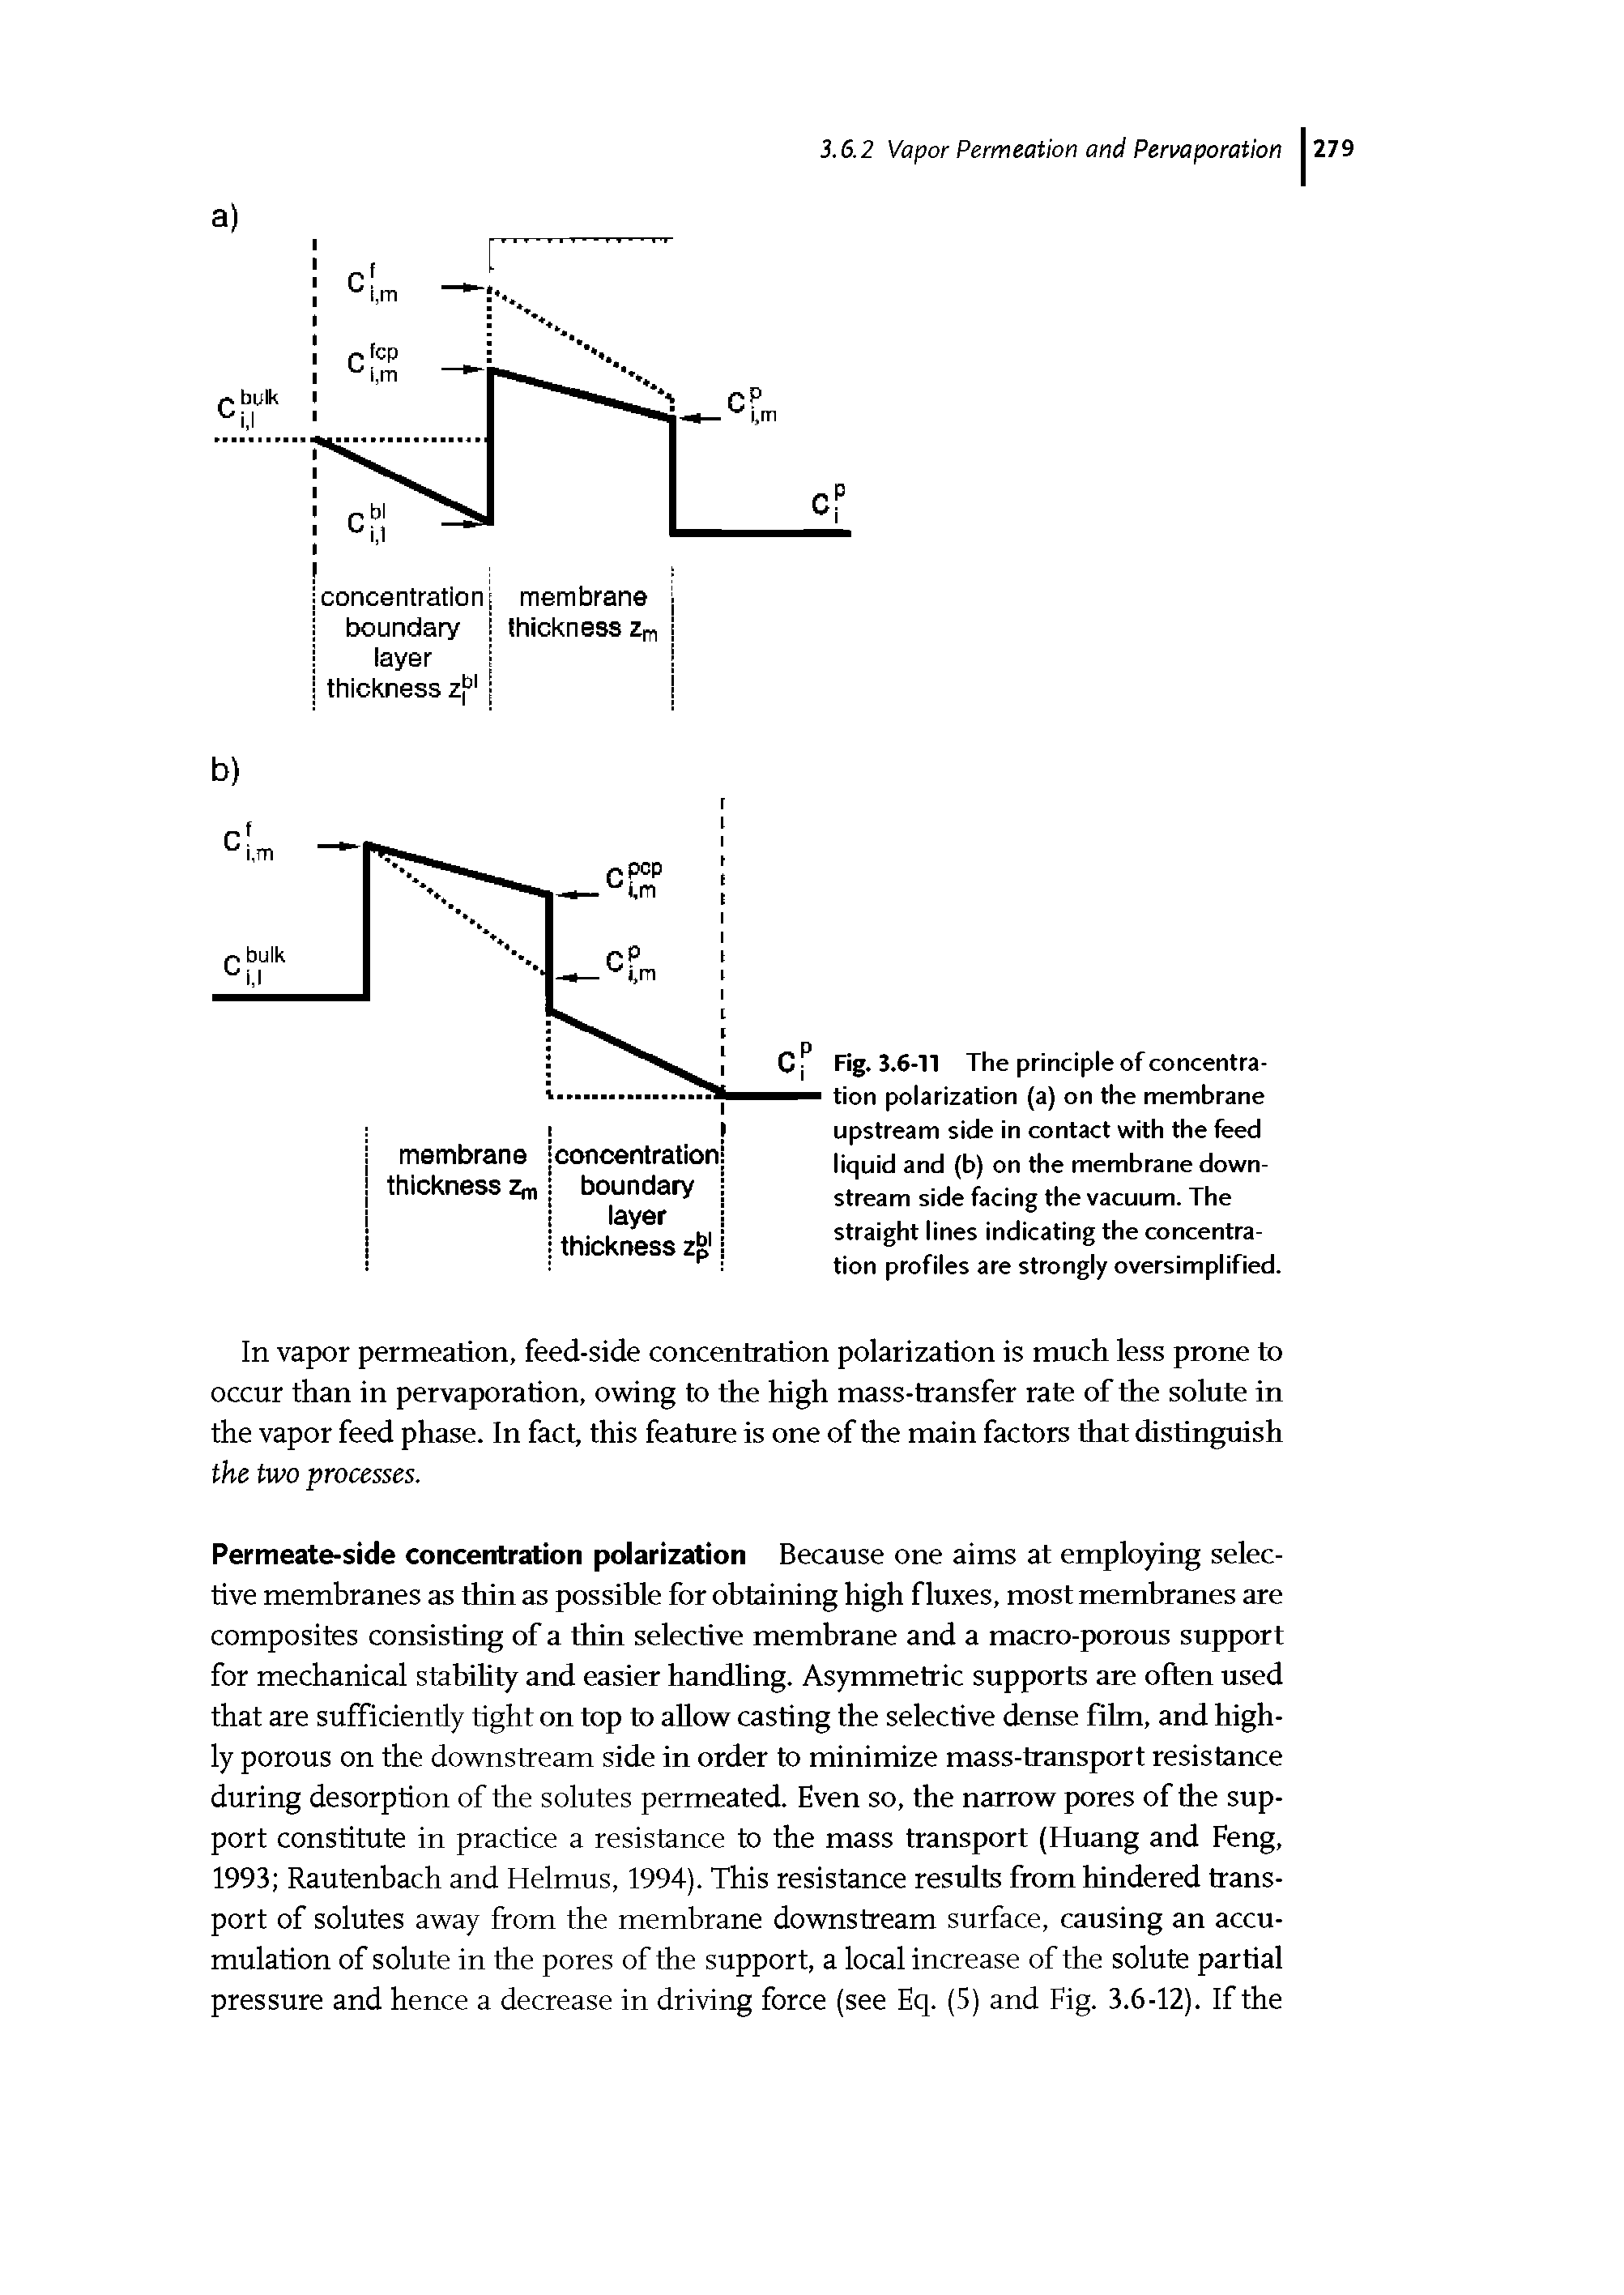 Fig. 3.6-11 The principle of concentration polarization (a) on the membrane upstream side in contact with the feed liquid and (b) on the membrane downstream side facing the vacuum. The straight lines indicating the concentration profiles are strongly oversimplified.